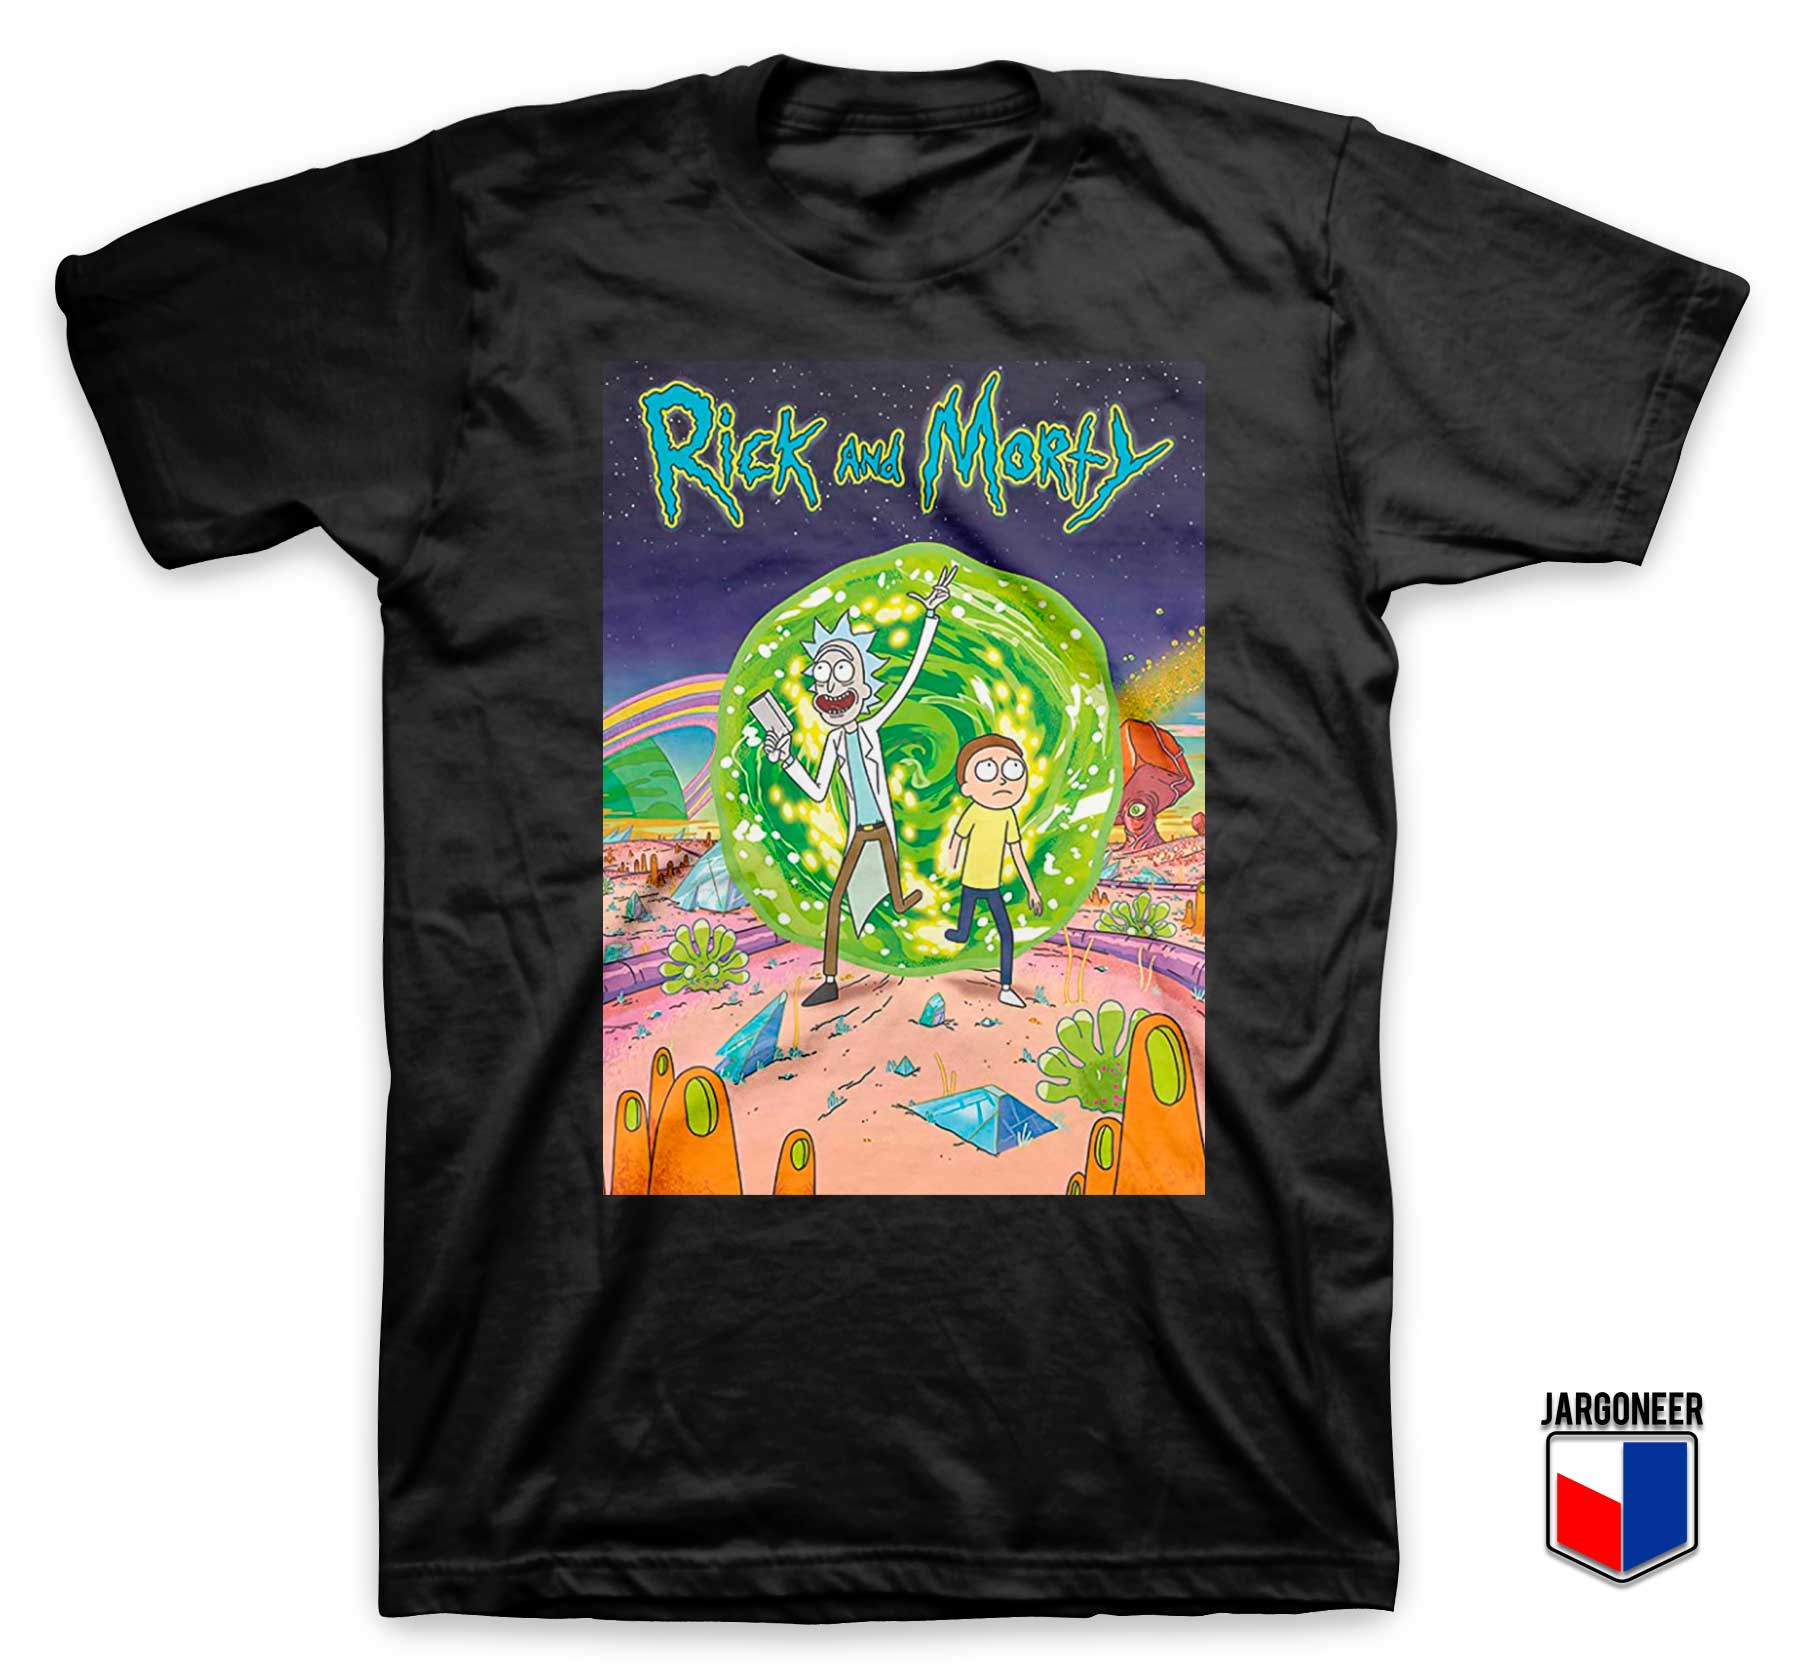 Buy Now Rick and Morty TV Series T Shirt with Unique Graphic